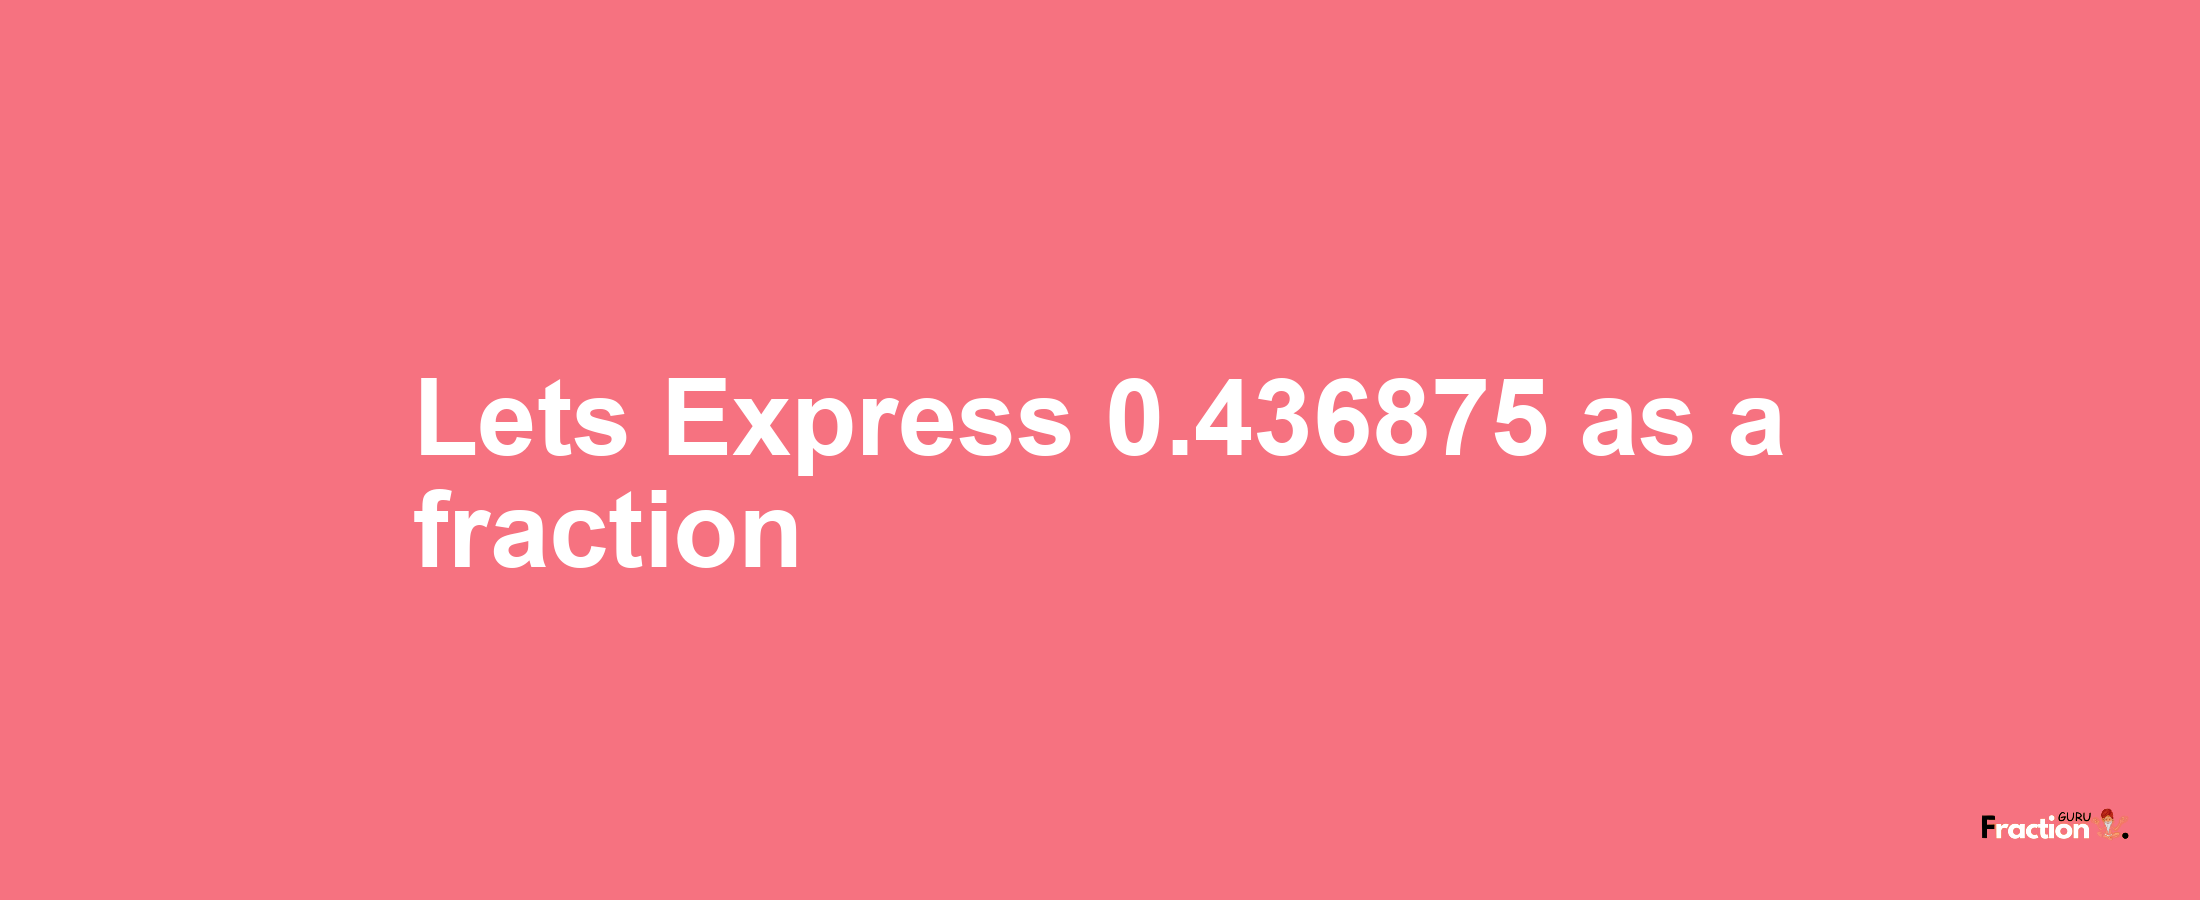 Lets Express 0.436875 as afraction